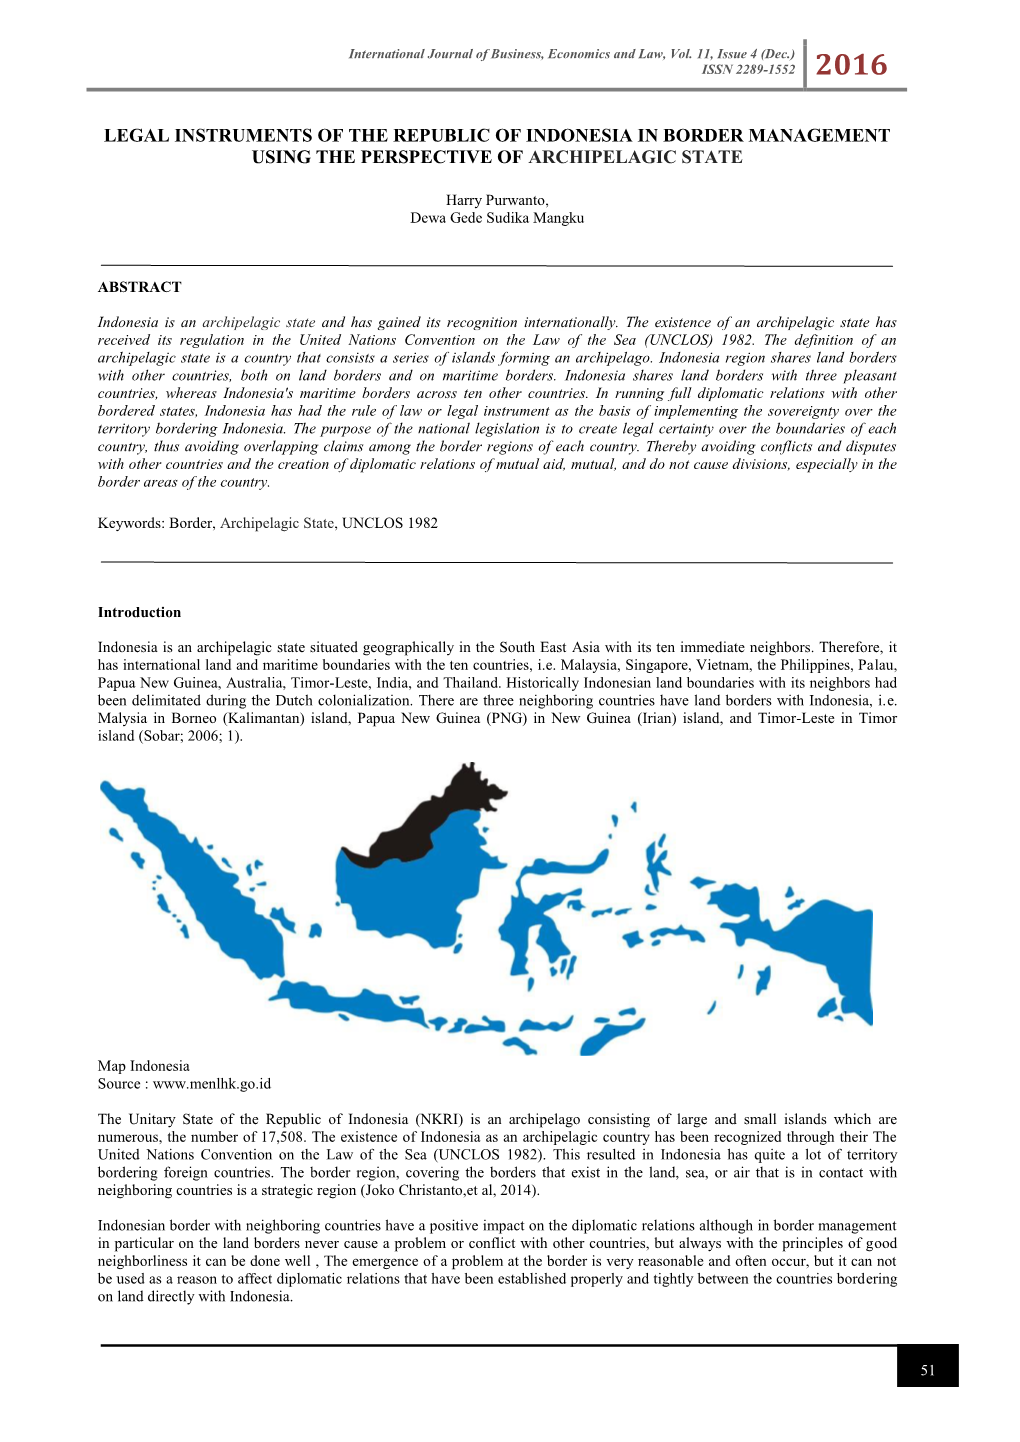 Legal Instruments of the Republic of Indonesia in Border Management Using the Perspective of Archipelagic State